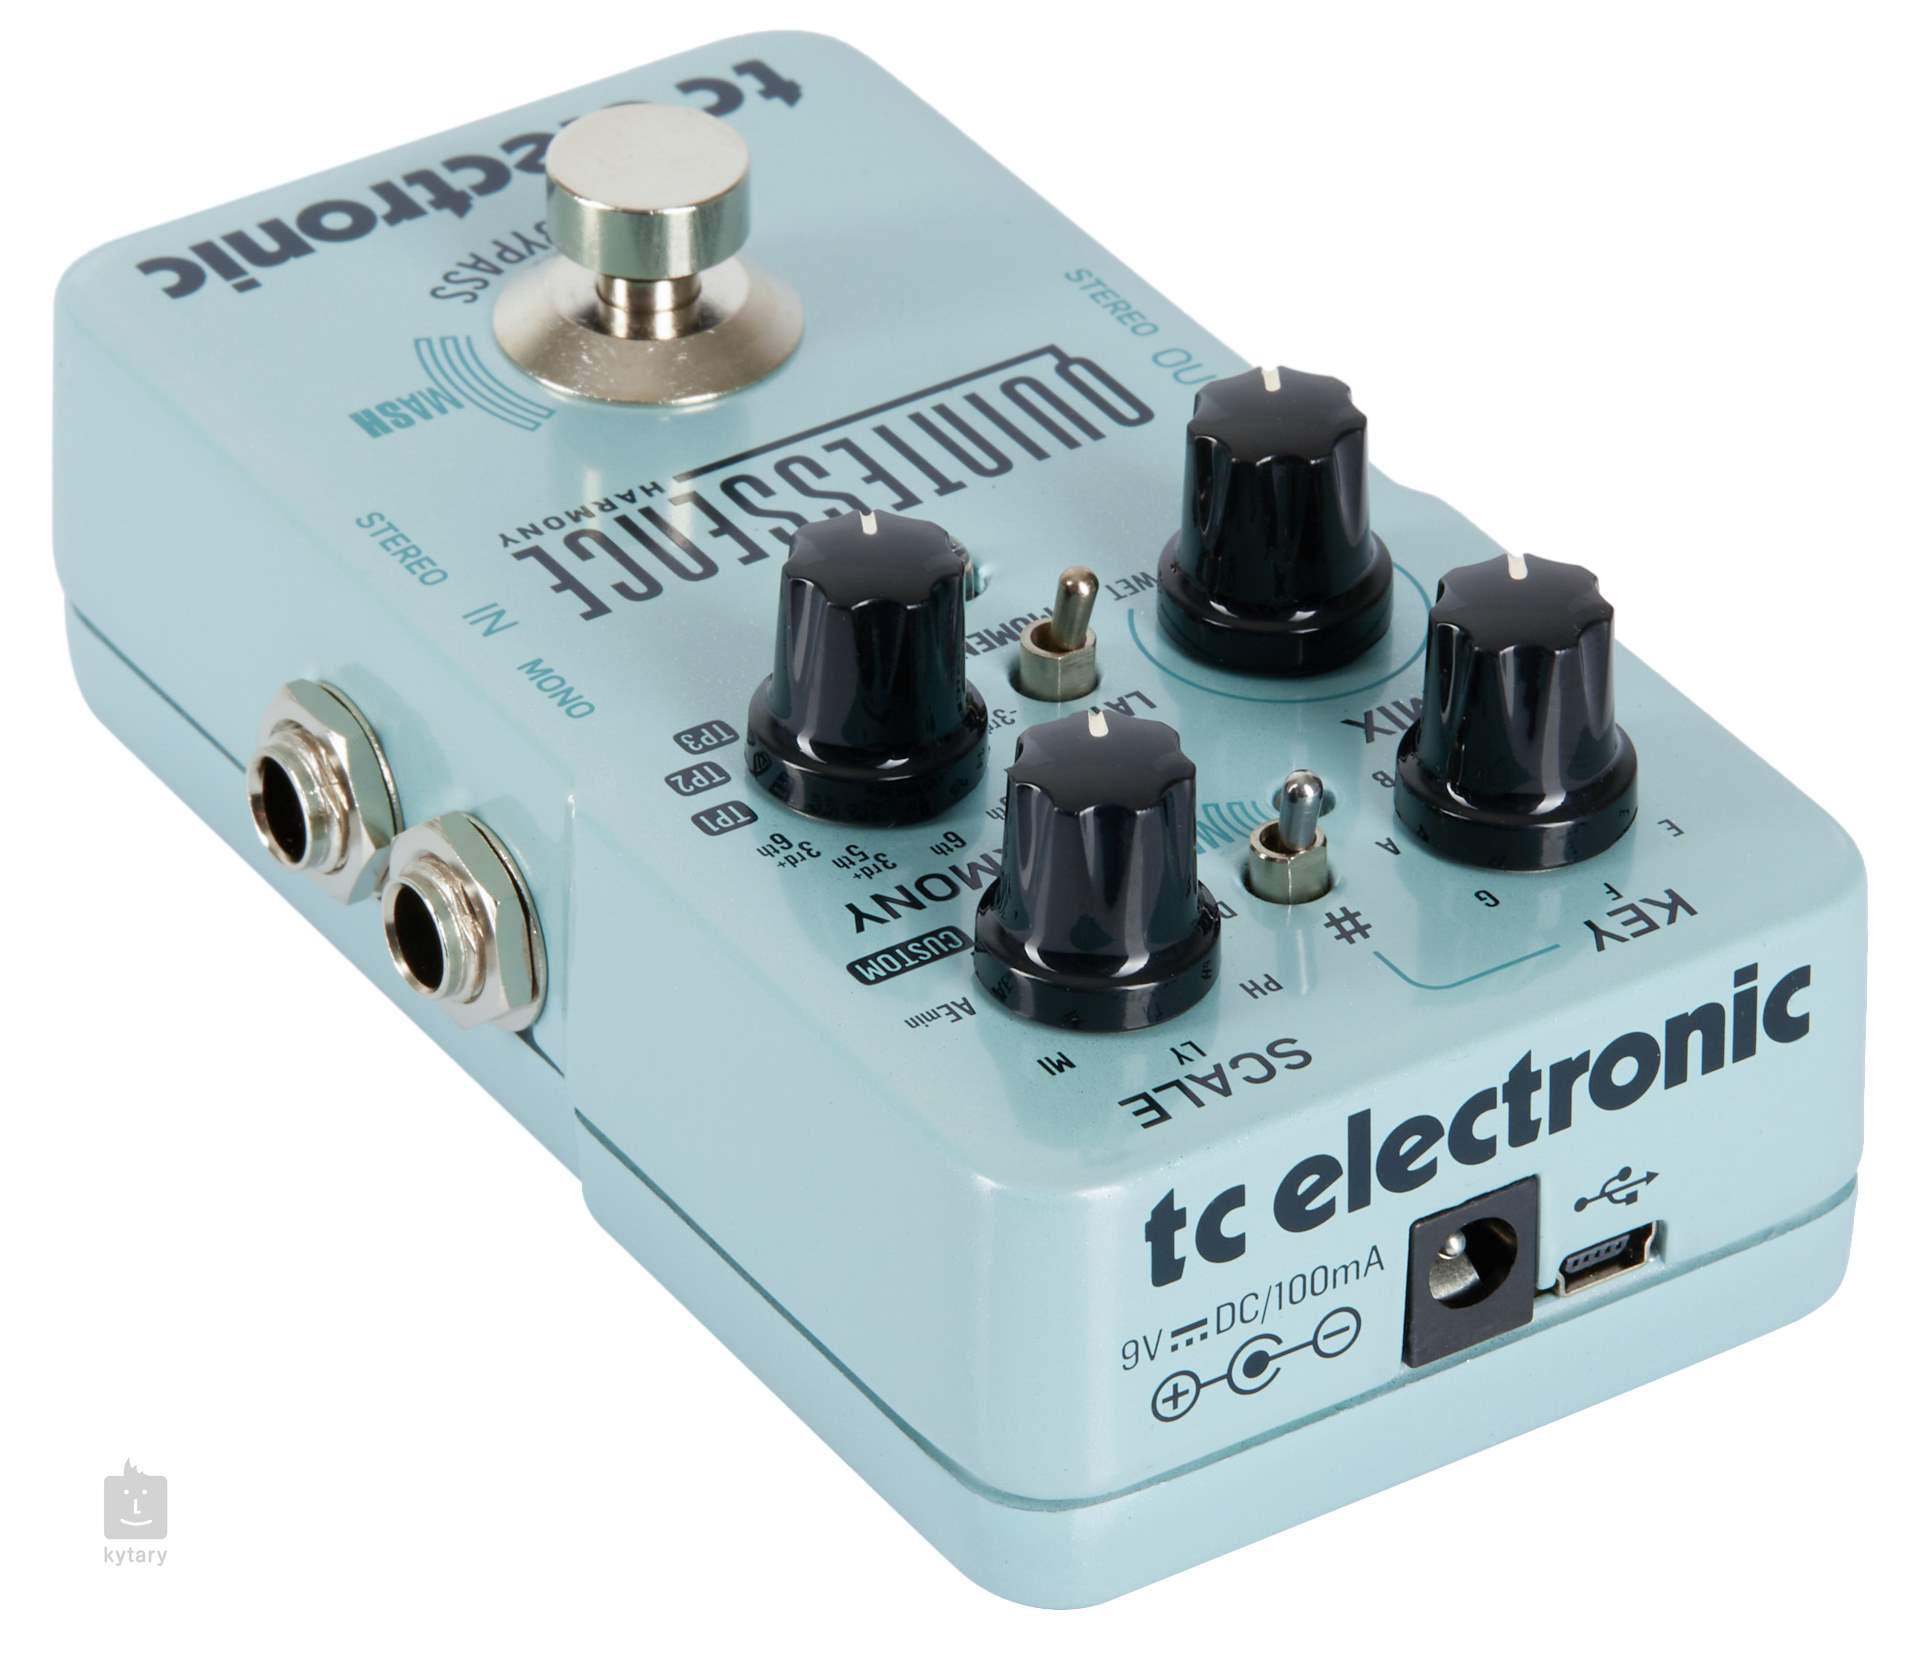 TC ELECTRONIC Quintessence Guitar Effect   Kytary.ie